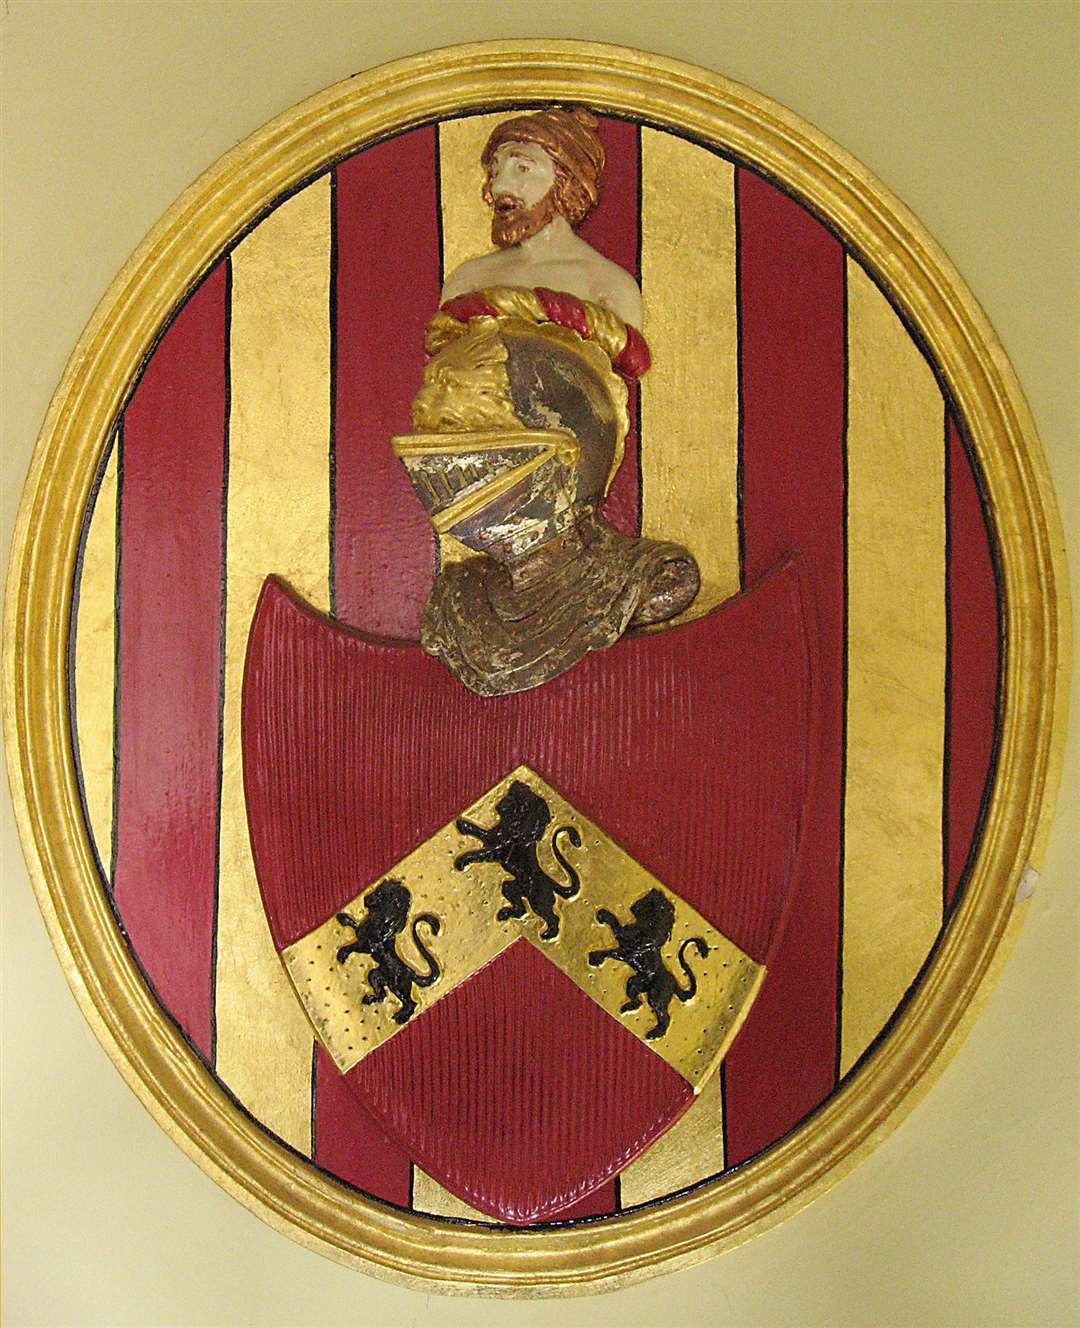 The coat of arms for Sir John de Cobham, one of the wealthy knights and Kent landowners who set up the original Wardens and Assistants of Rochester Bridge under royal assent in 1399. Picture: Rochester Bridge Trust